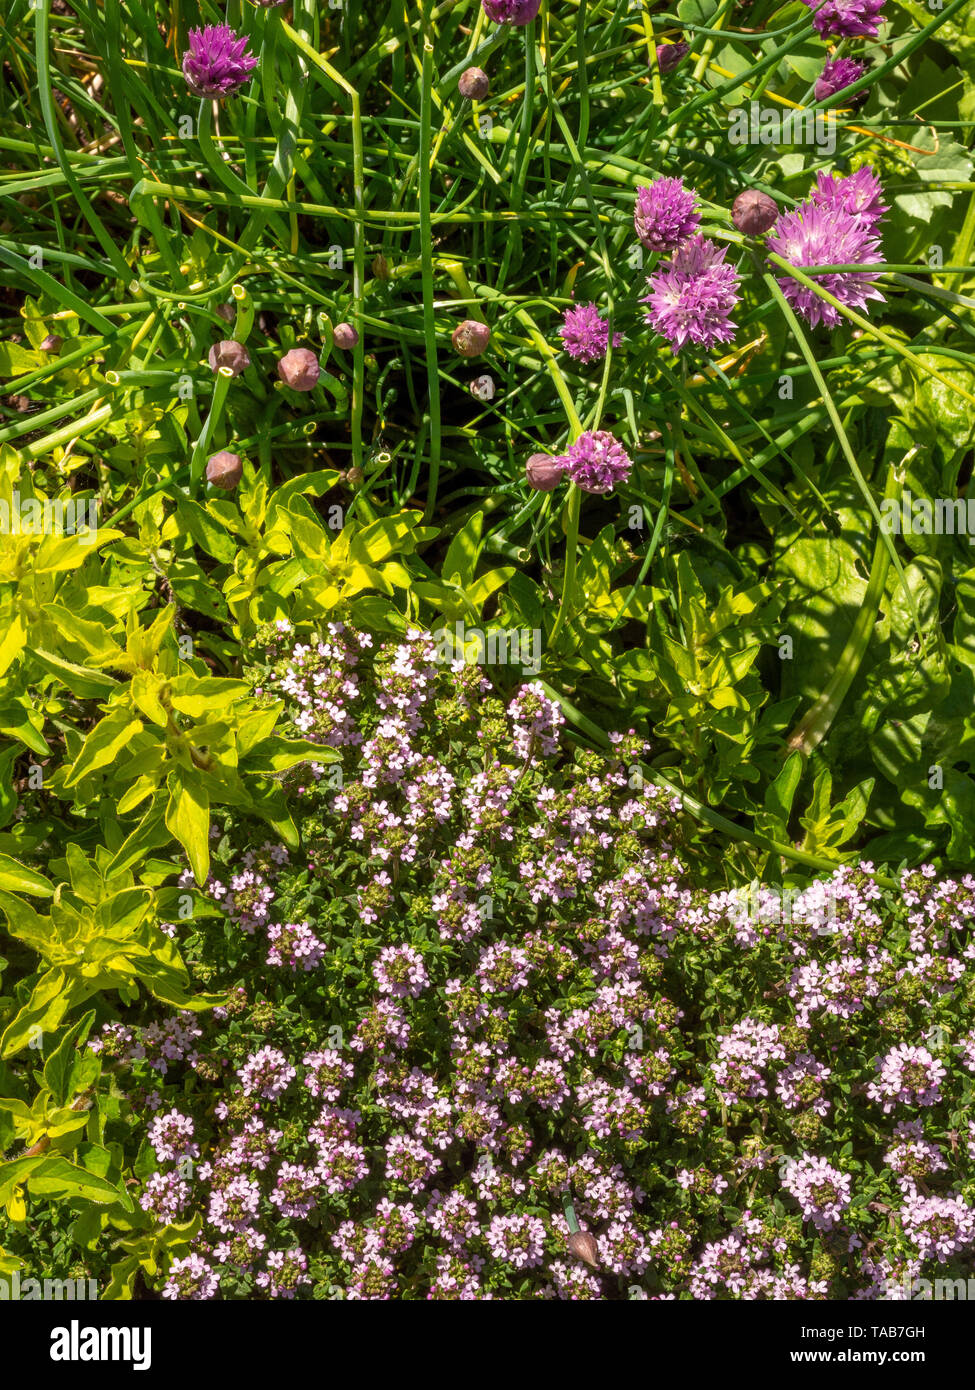 Outdoor herb patch with thyme, golden oregano and chives. Stock Photo